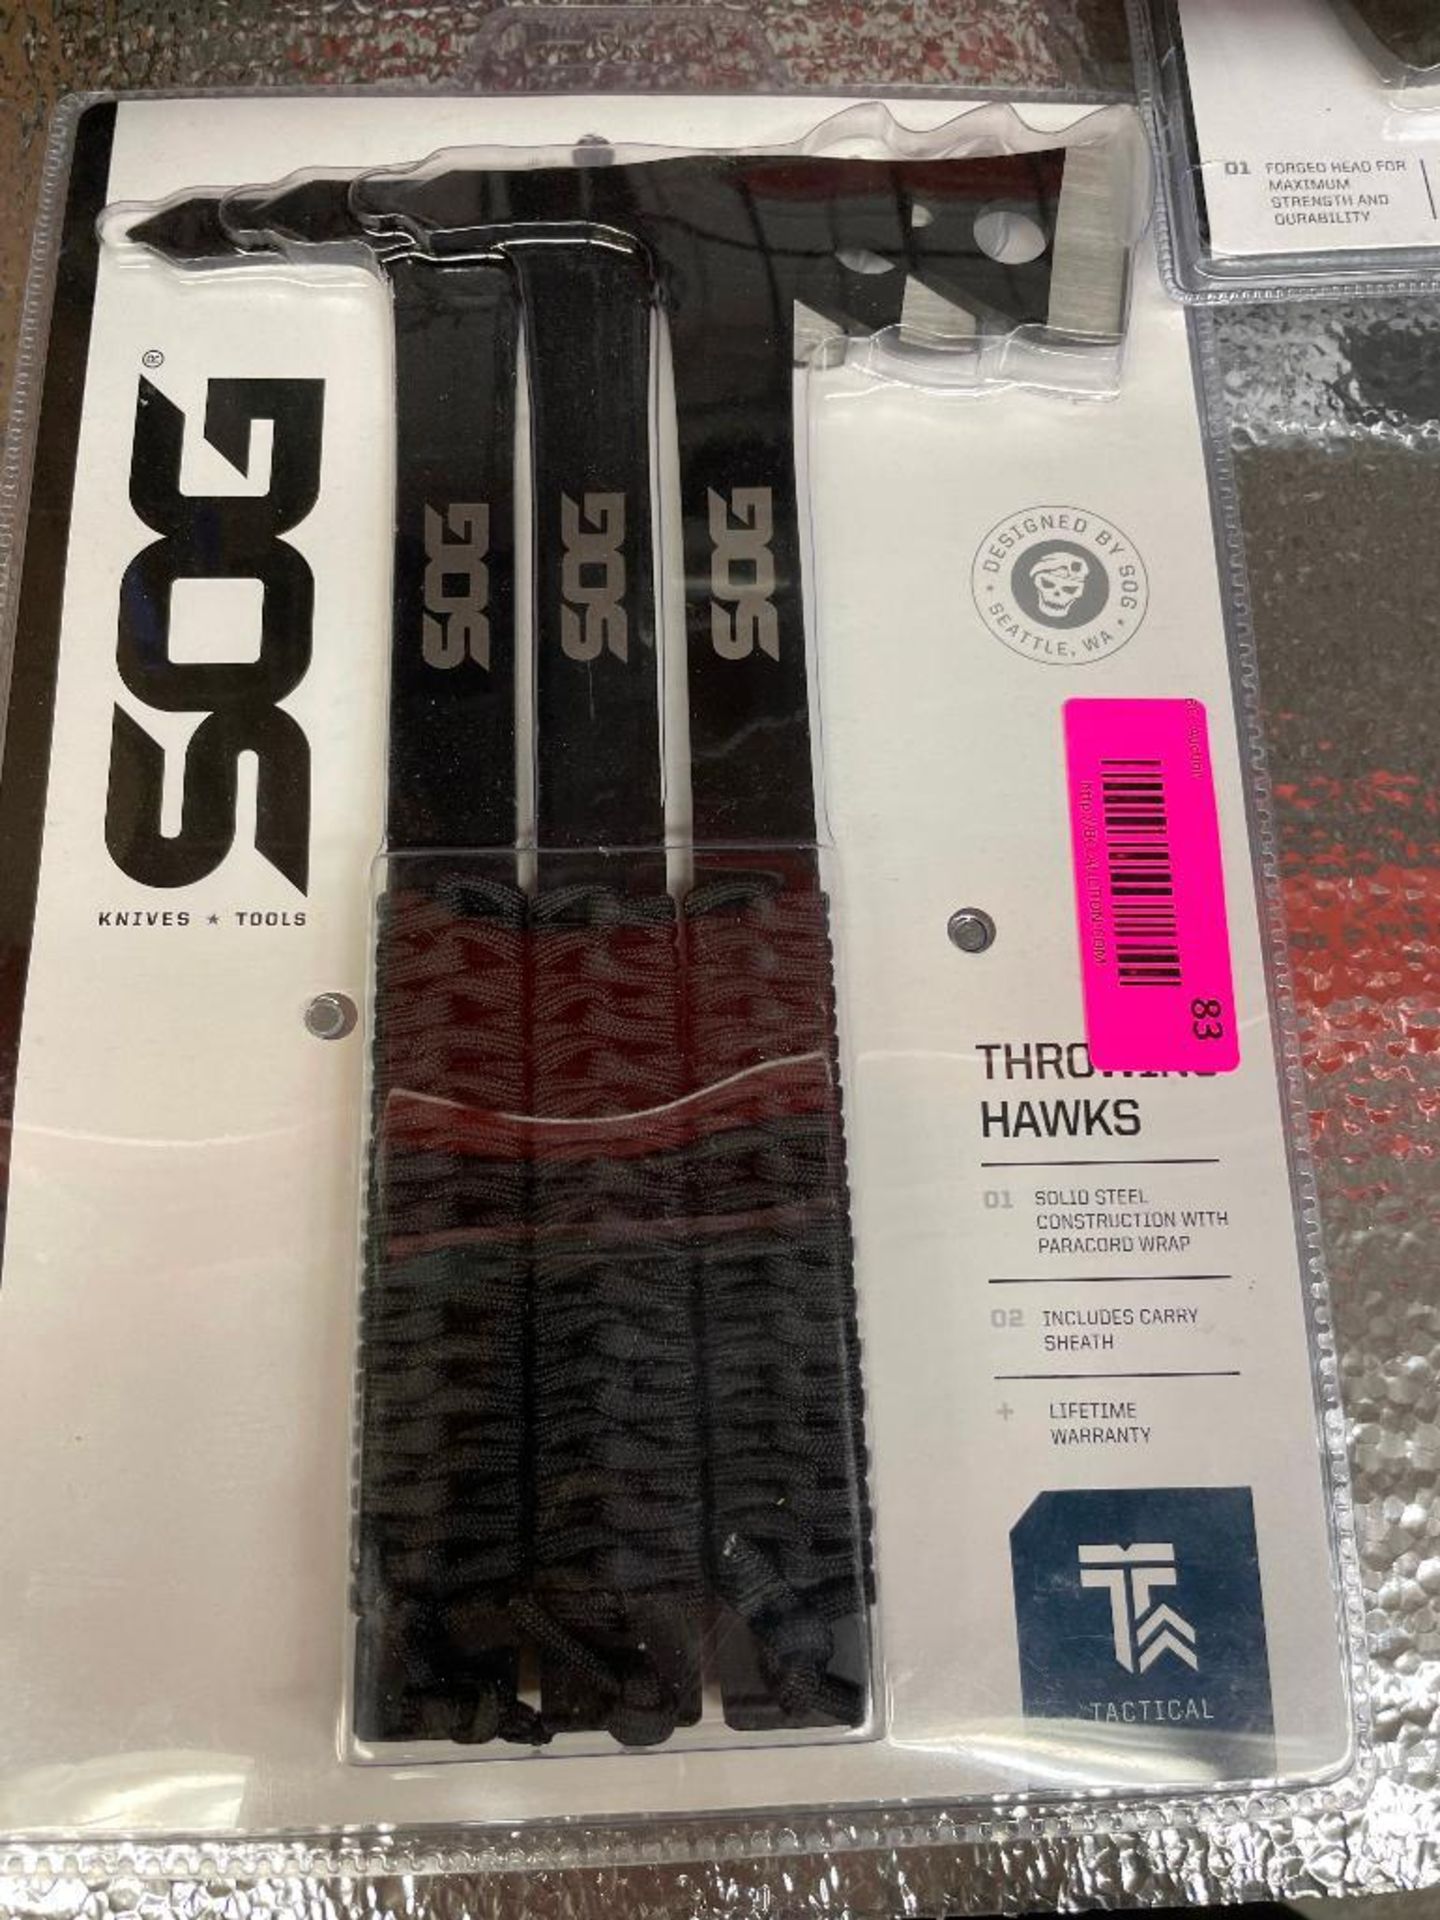 DESCRIPTION: SOG THROWING HAWKS AND SOG BASE CAMP AXE ADDITIONAL INFORMATION RETAIL VALUE $120 LOCAT - Image 3 of 4